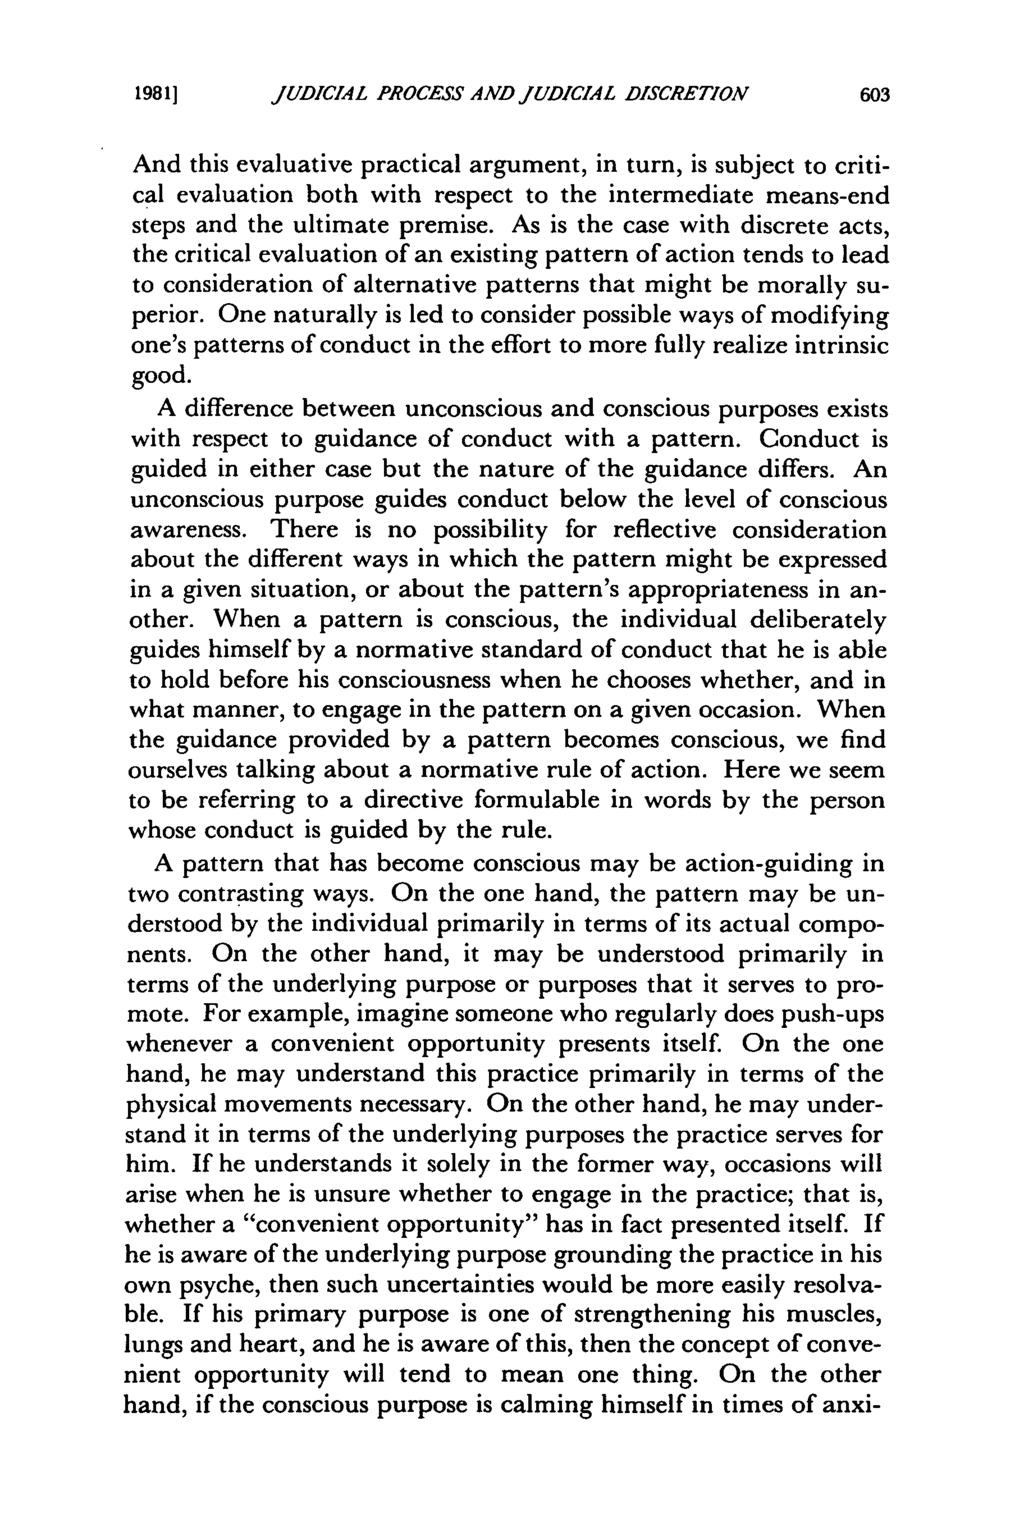 1981] Pannier: The Nature of the Judicial Process and Judicial Discretion JUDICIAL PROCESS AND JUDICIAL DISCRETION And this evaluative practical argument, in turn, is subject to critical evaluation